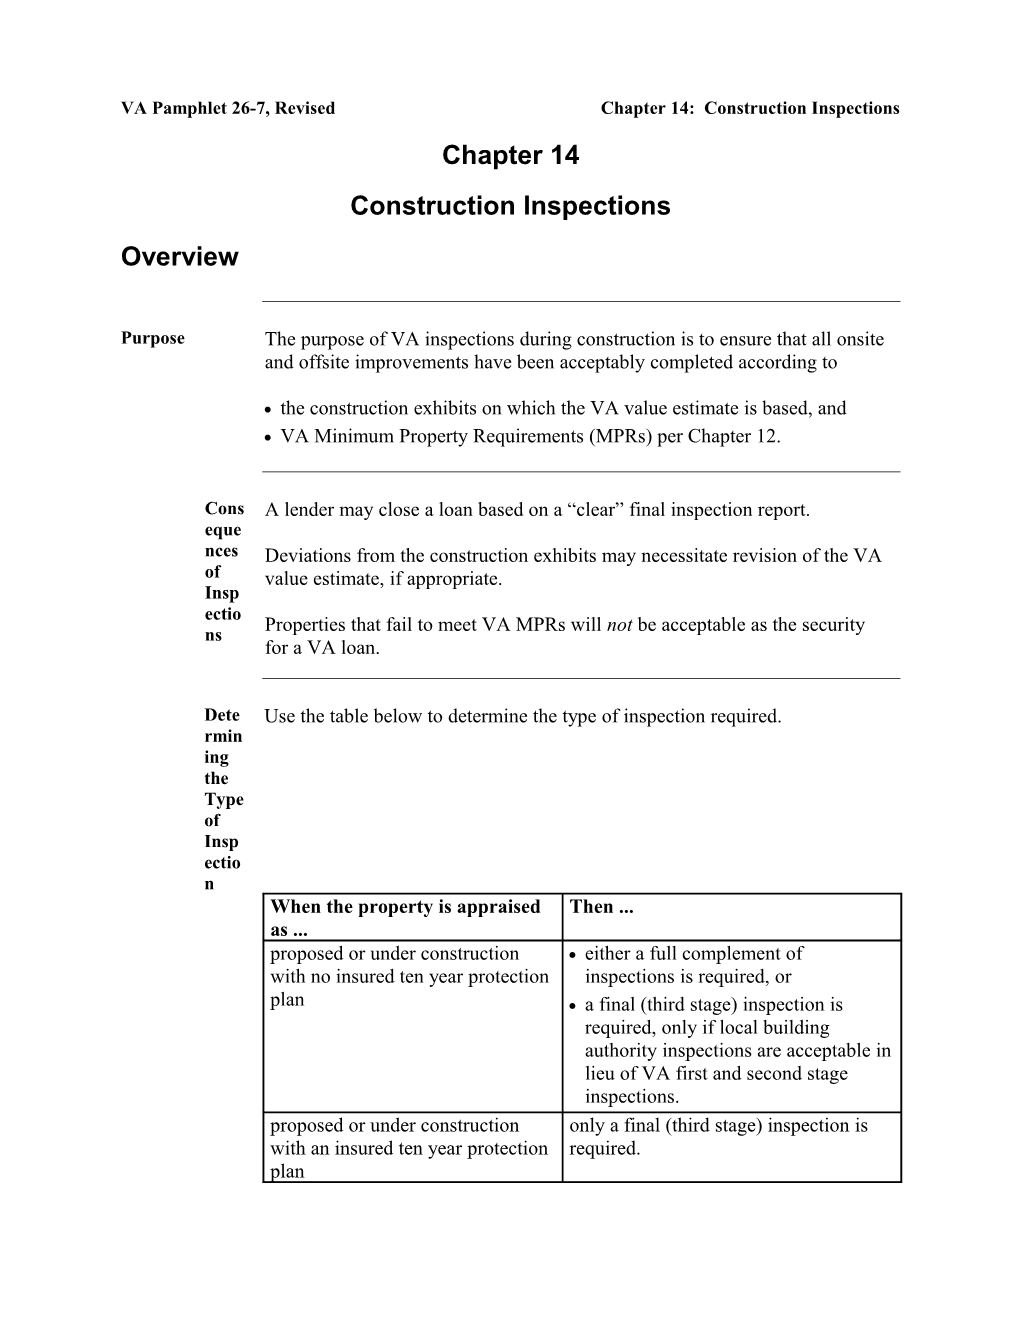 Pamphlet 26-7,Chapter 14 Construction Inspections